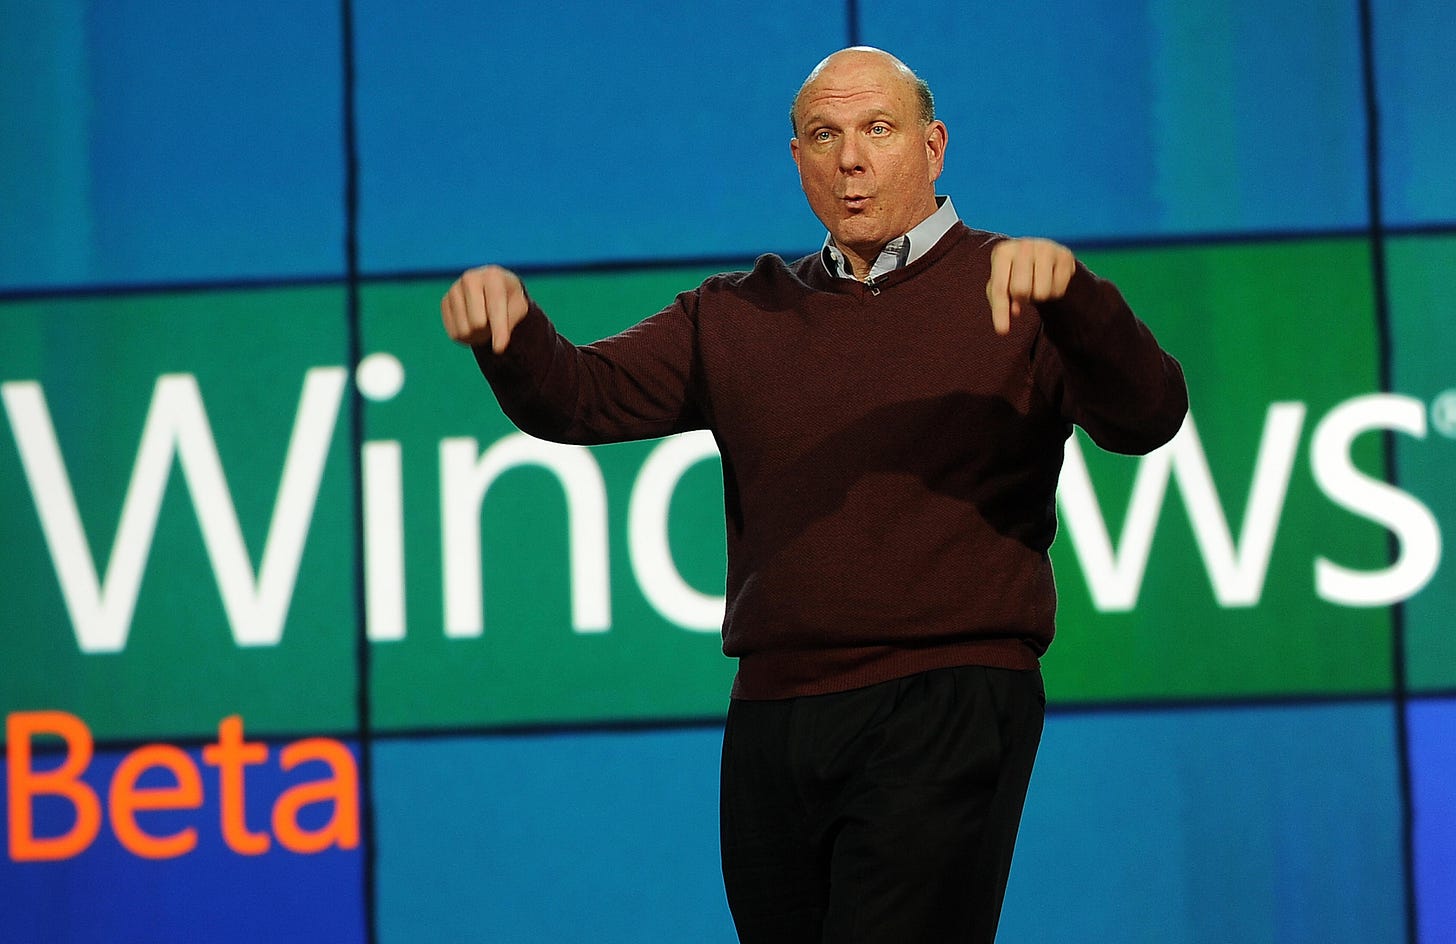 Steve Ballmer on stage with screens behind him saying Windows Beta.